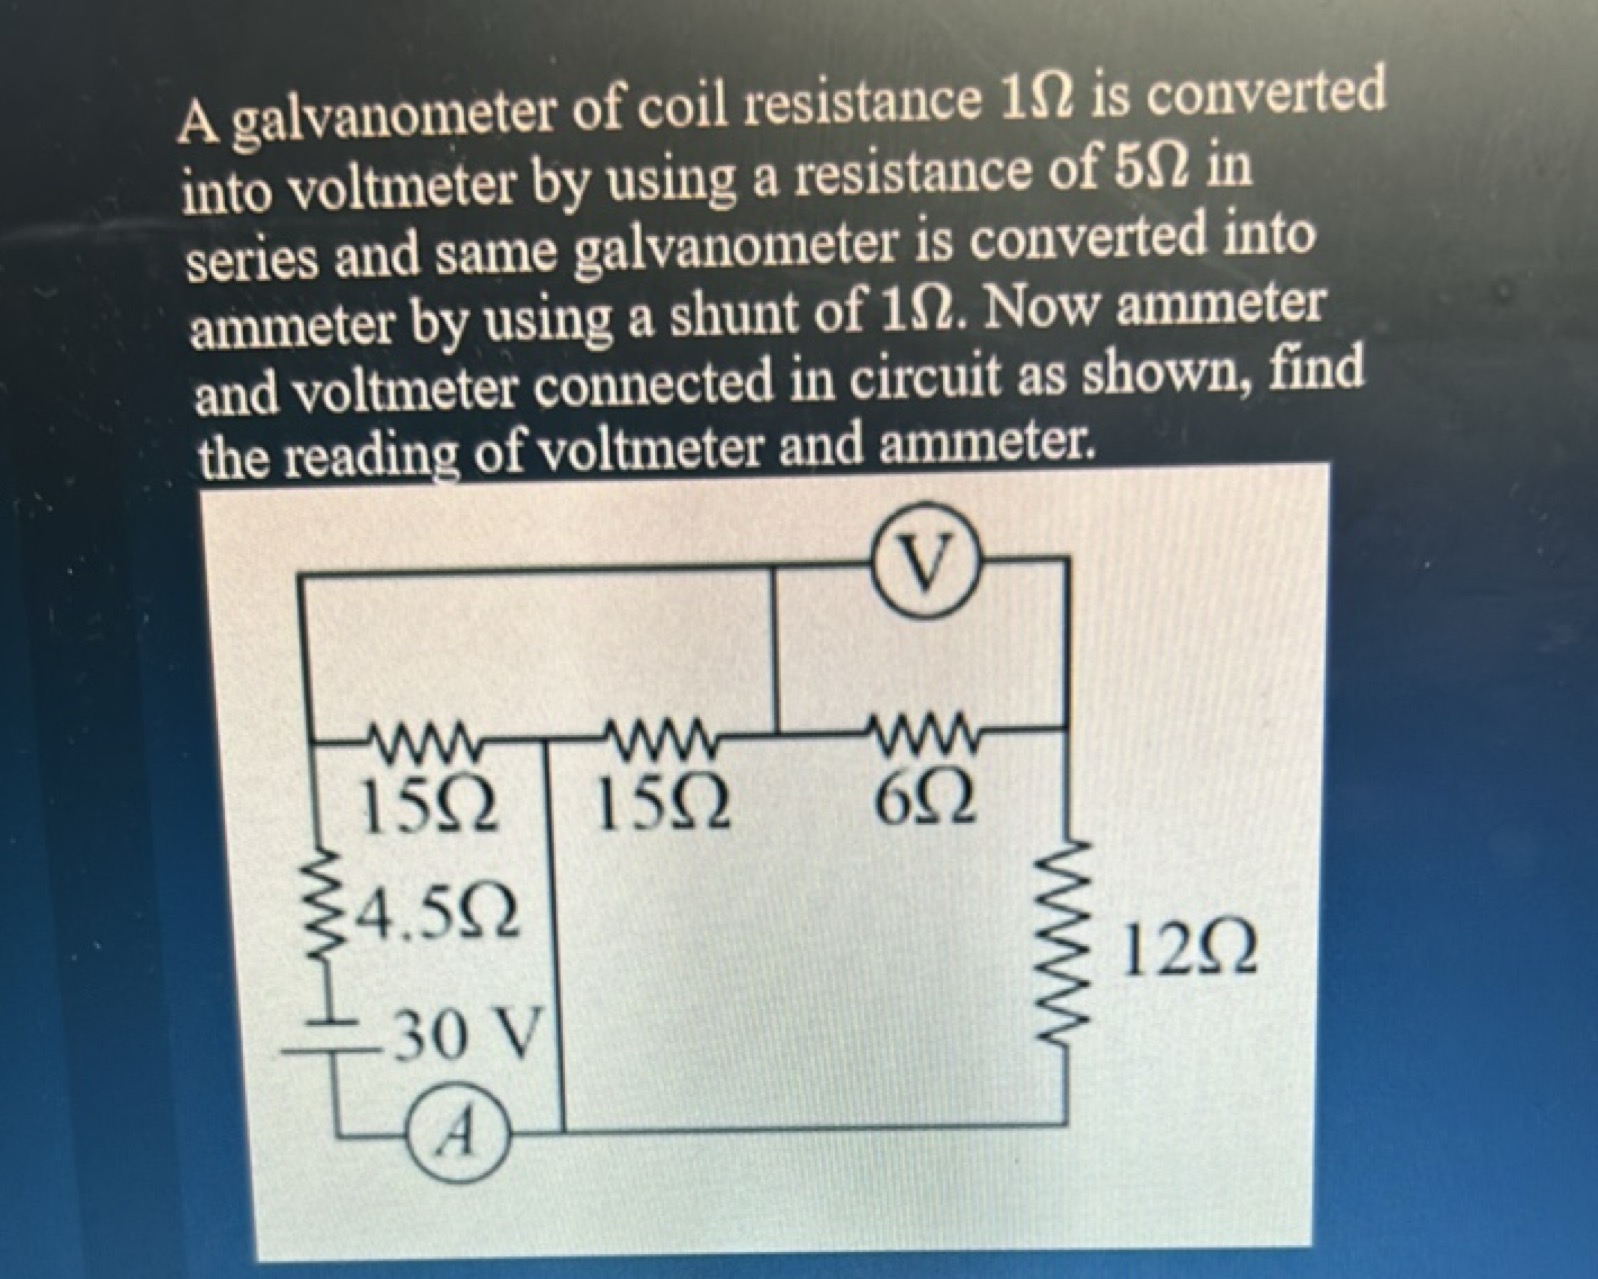 A galvanometer of coil resistance 1Ω is converted into voltmeter by us